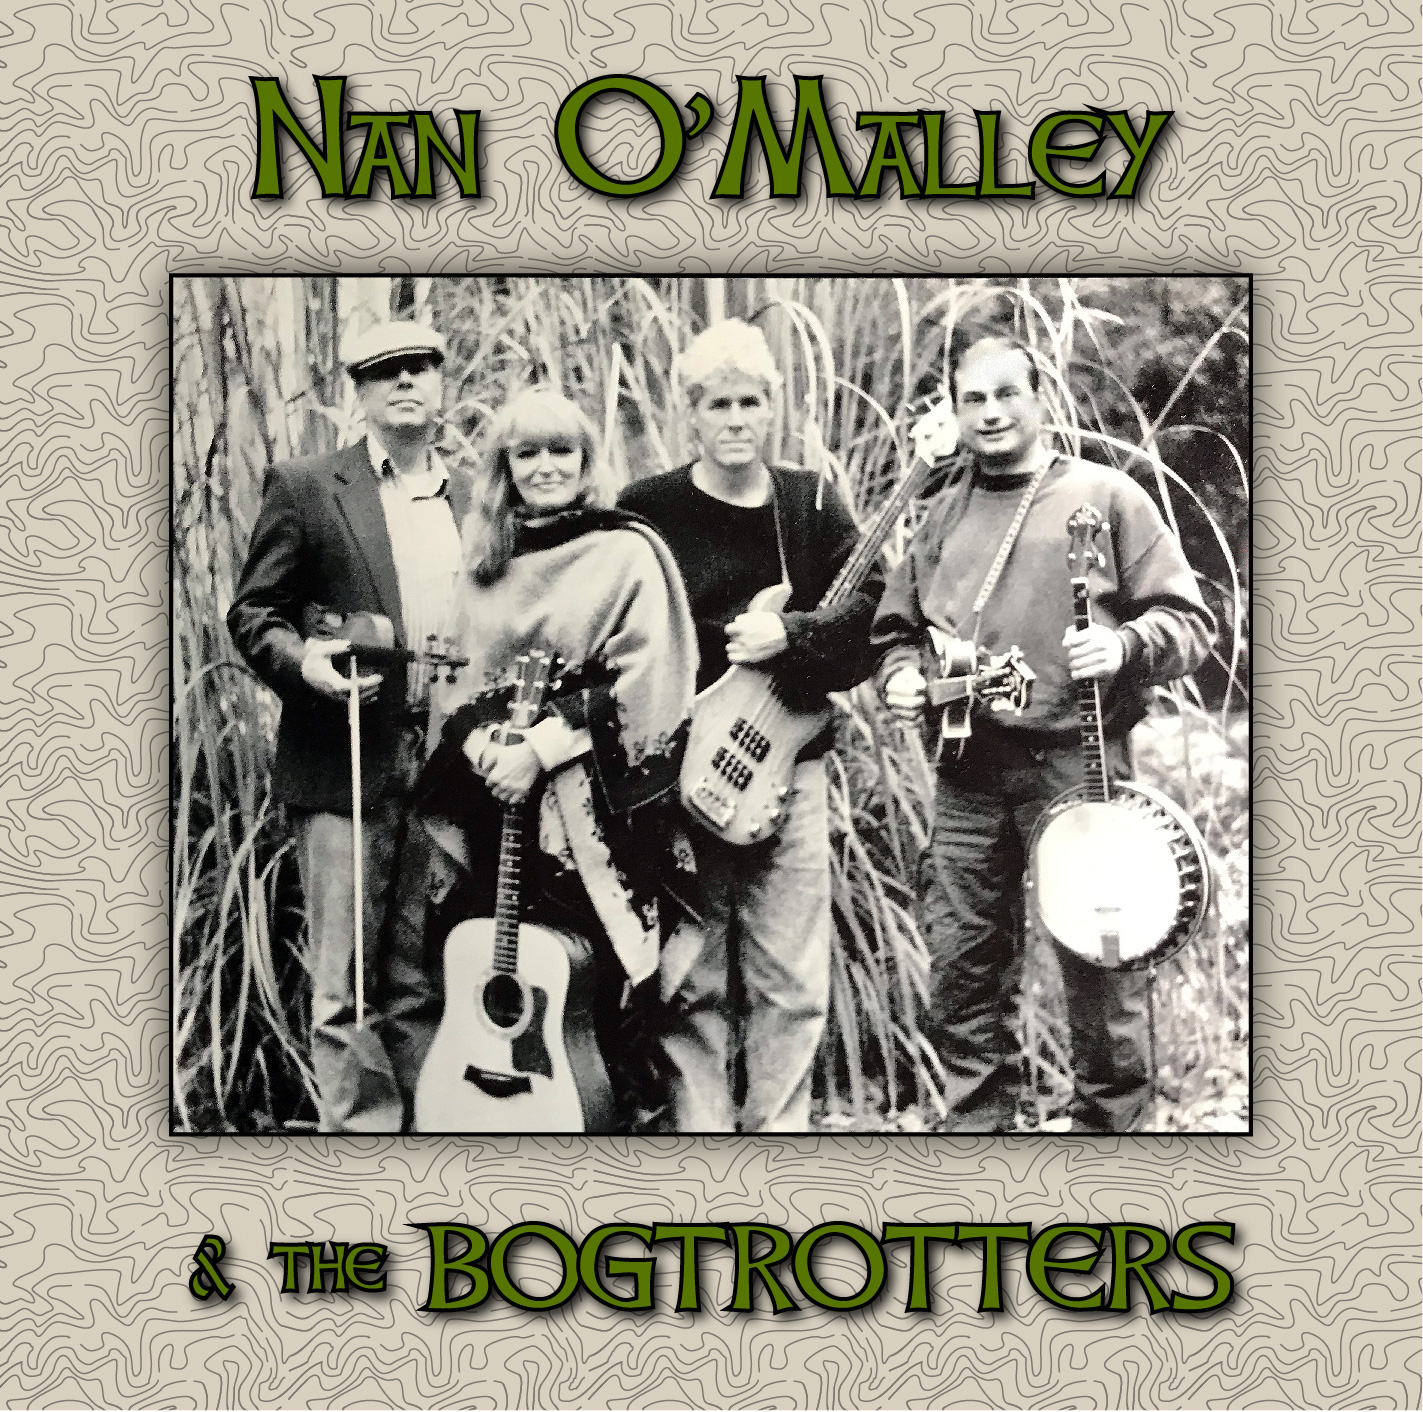 Nan O'Malley and the Bogtrotters